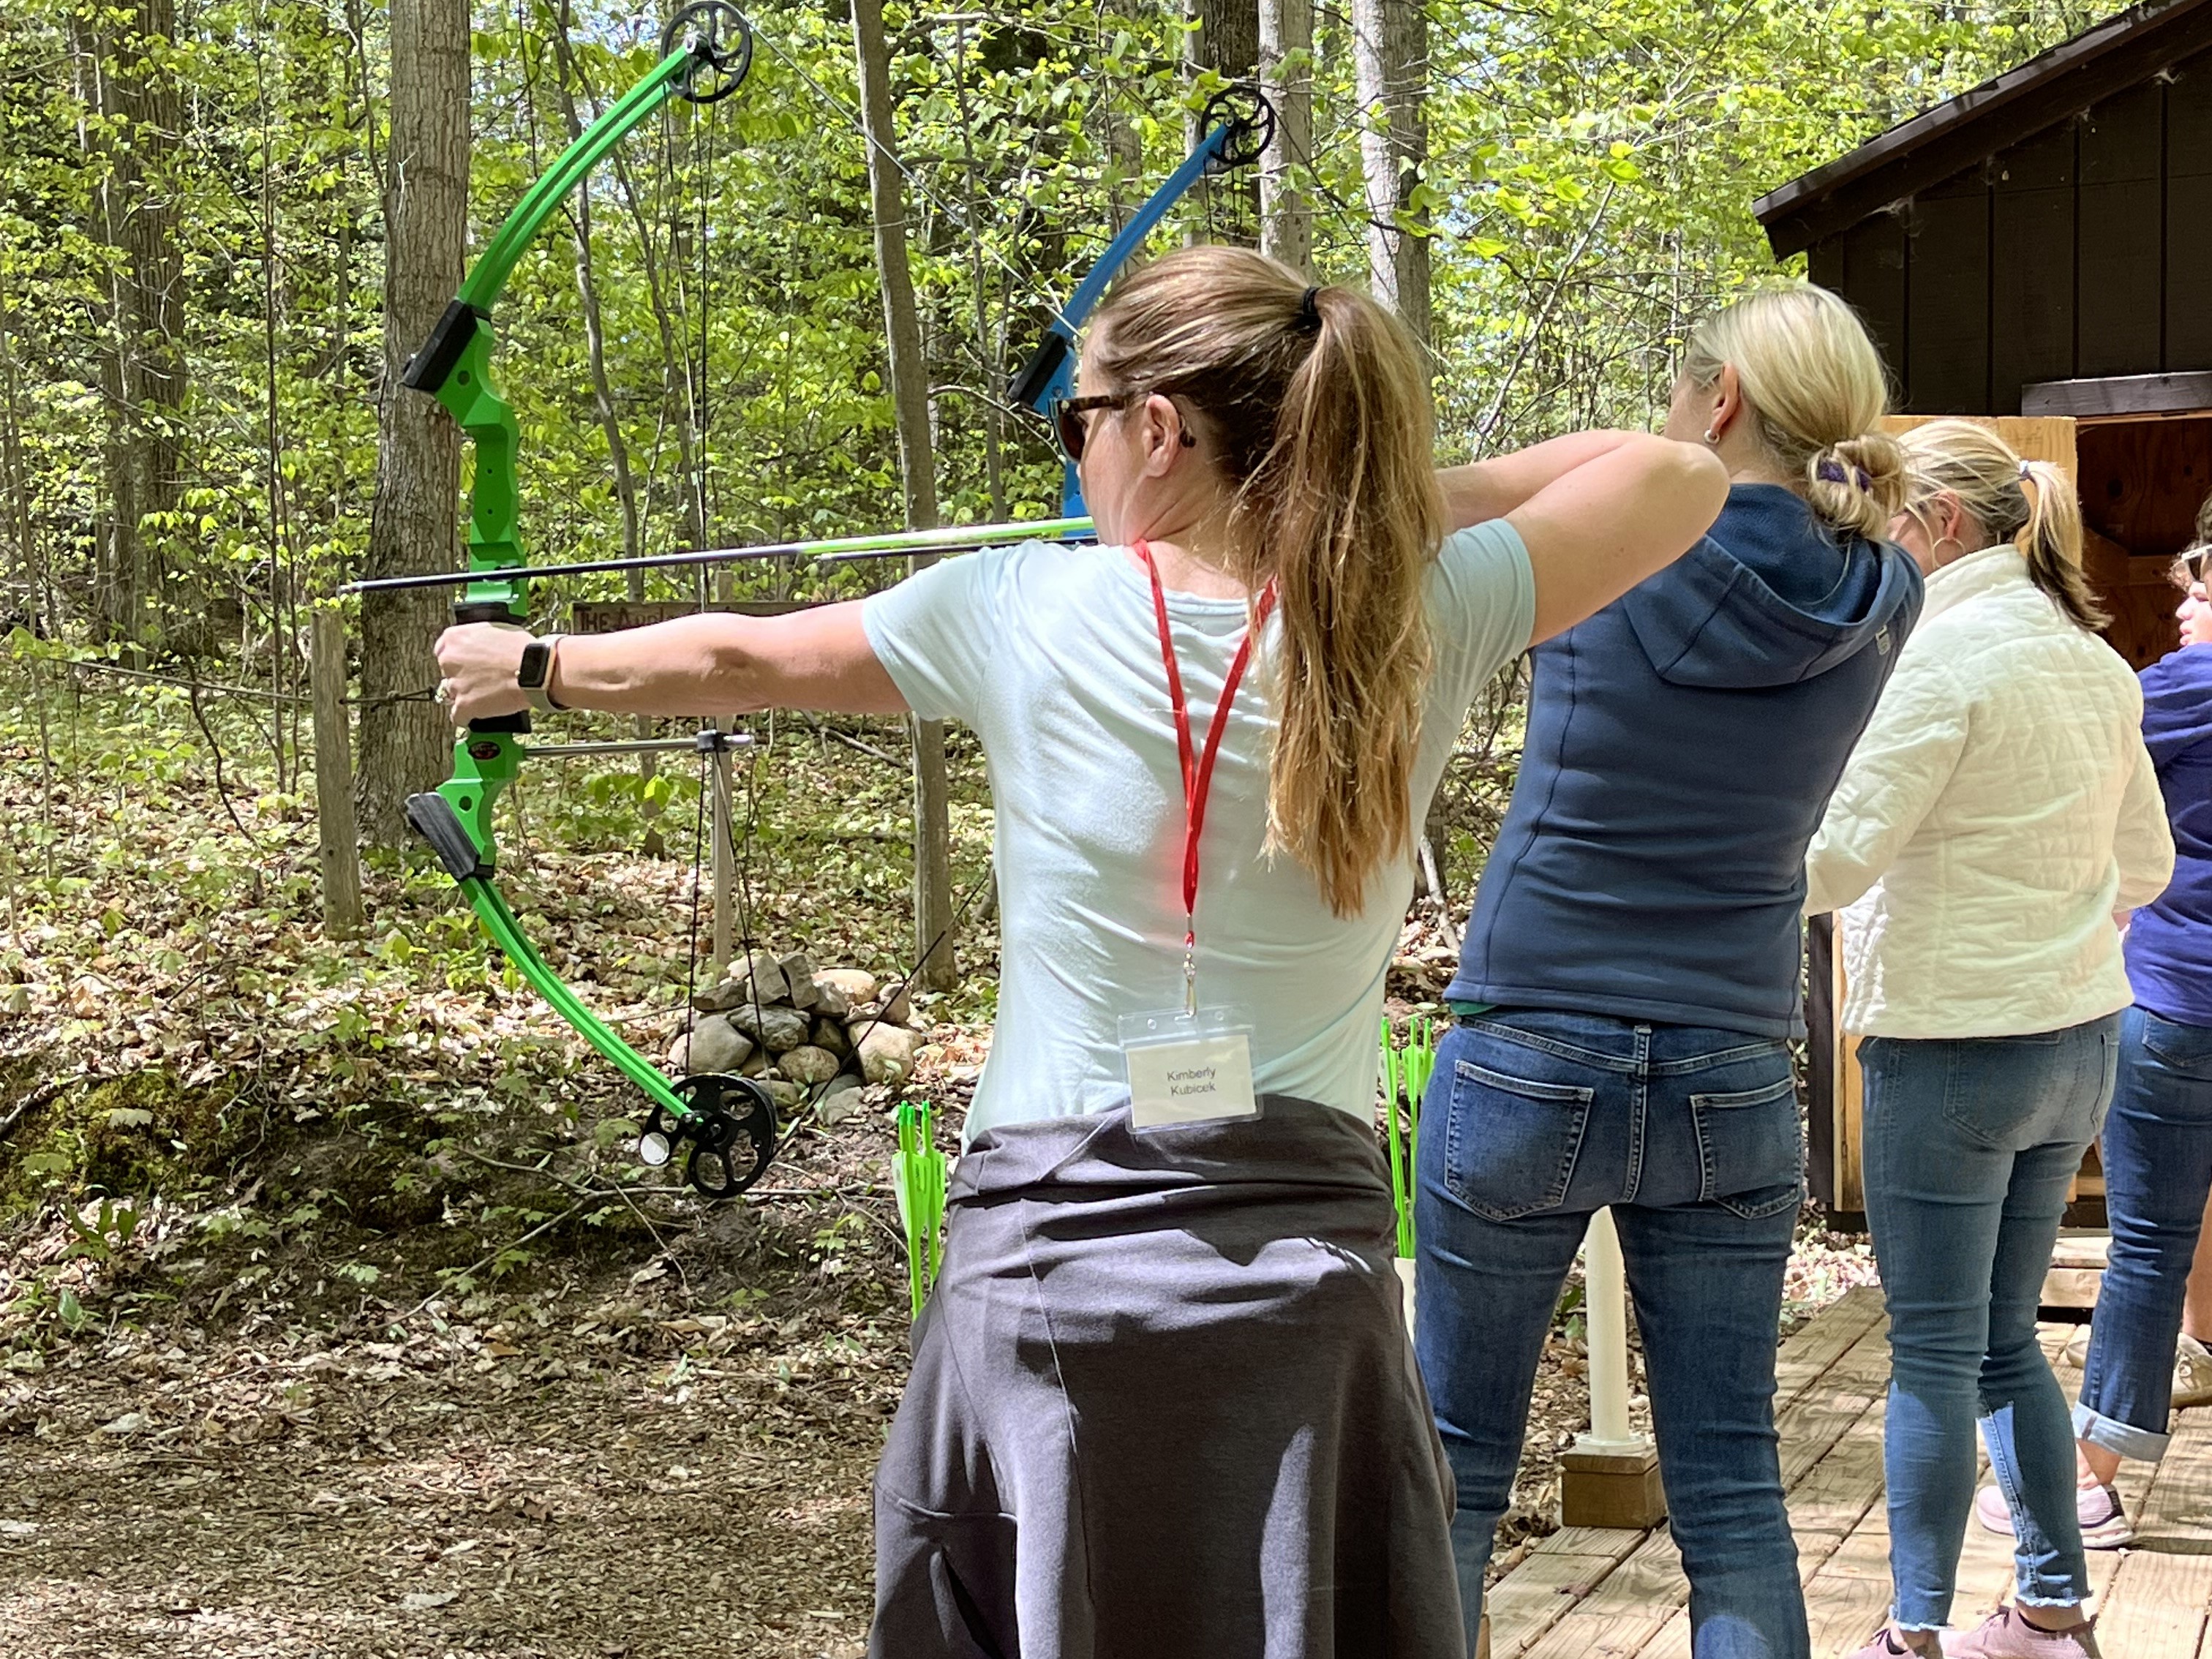 Enjoy the rest of summer outdoors at Camp Daggett in Petoskey